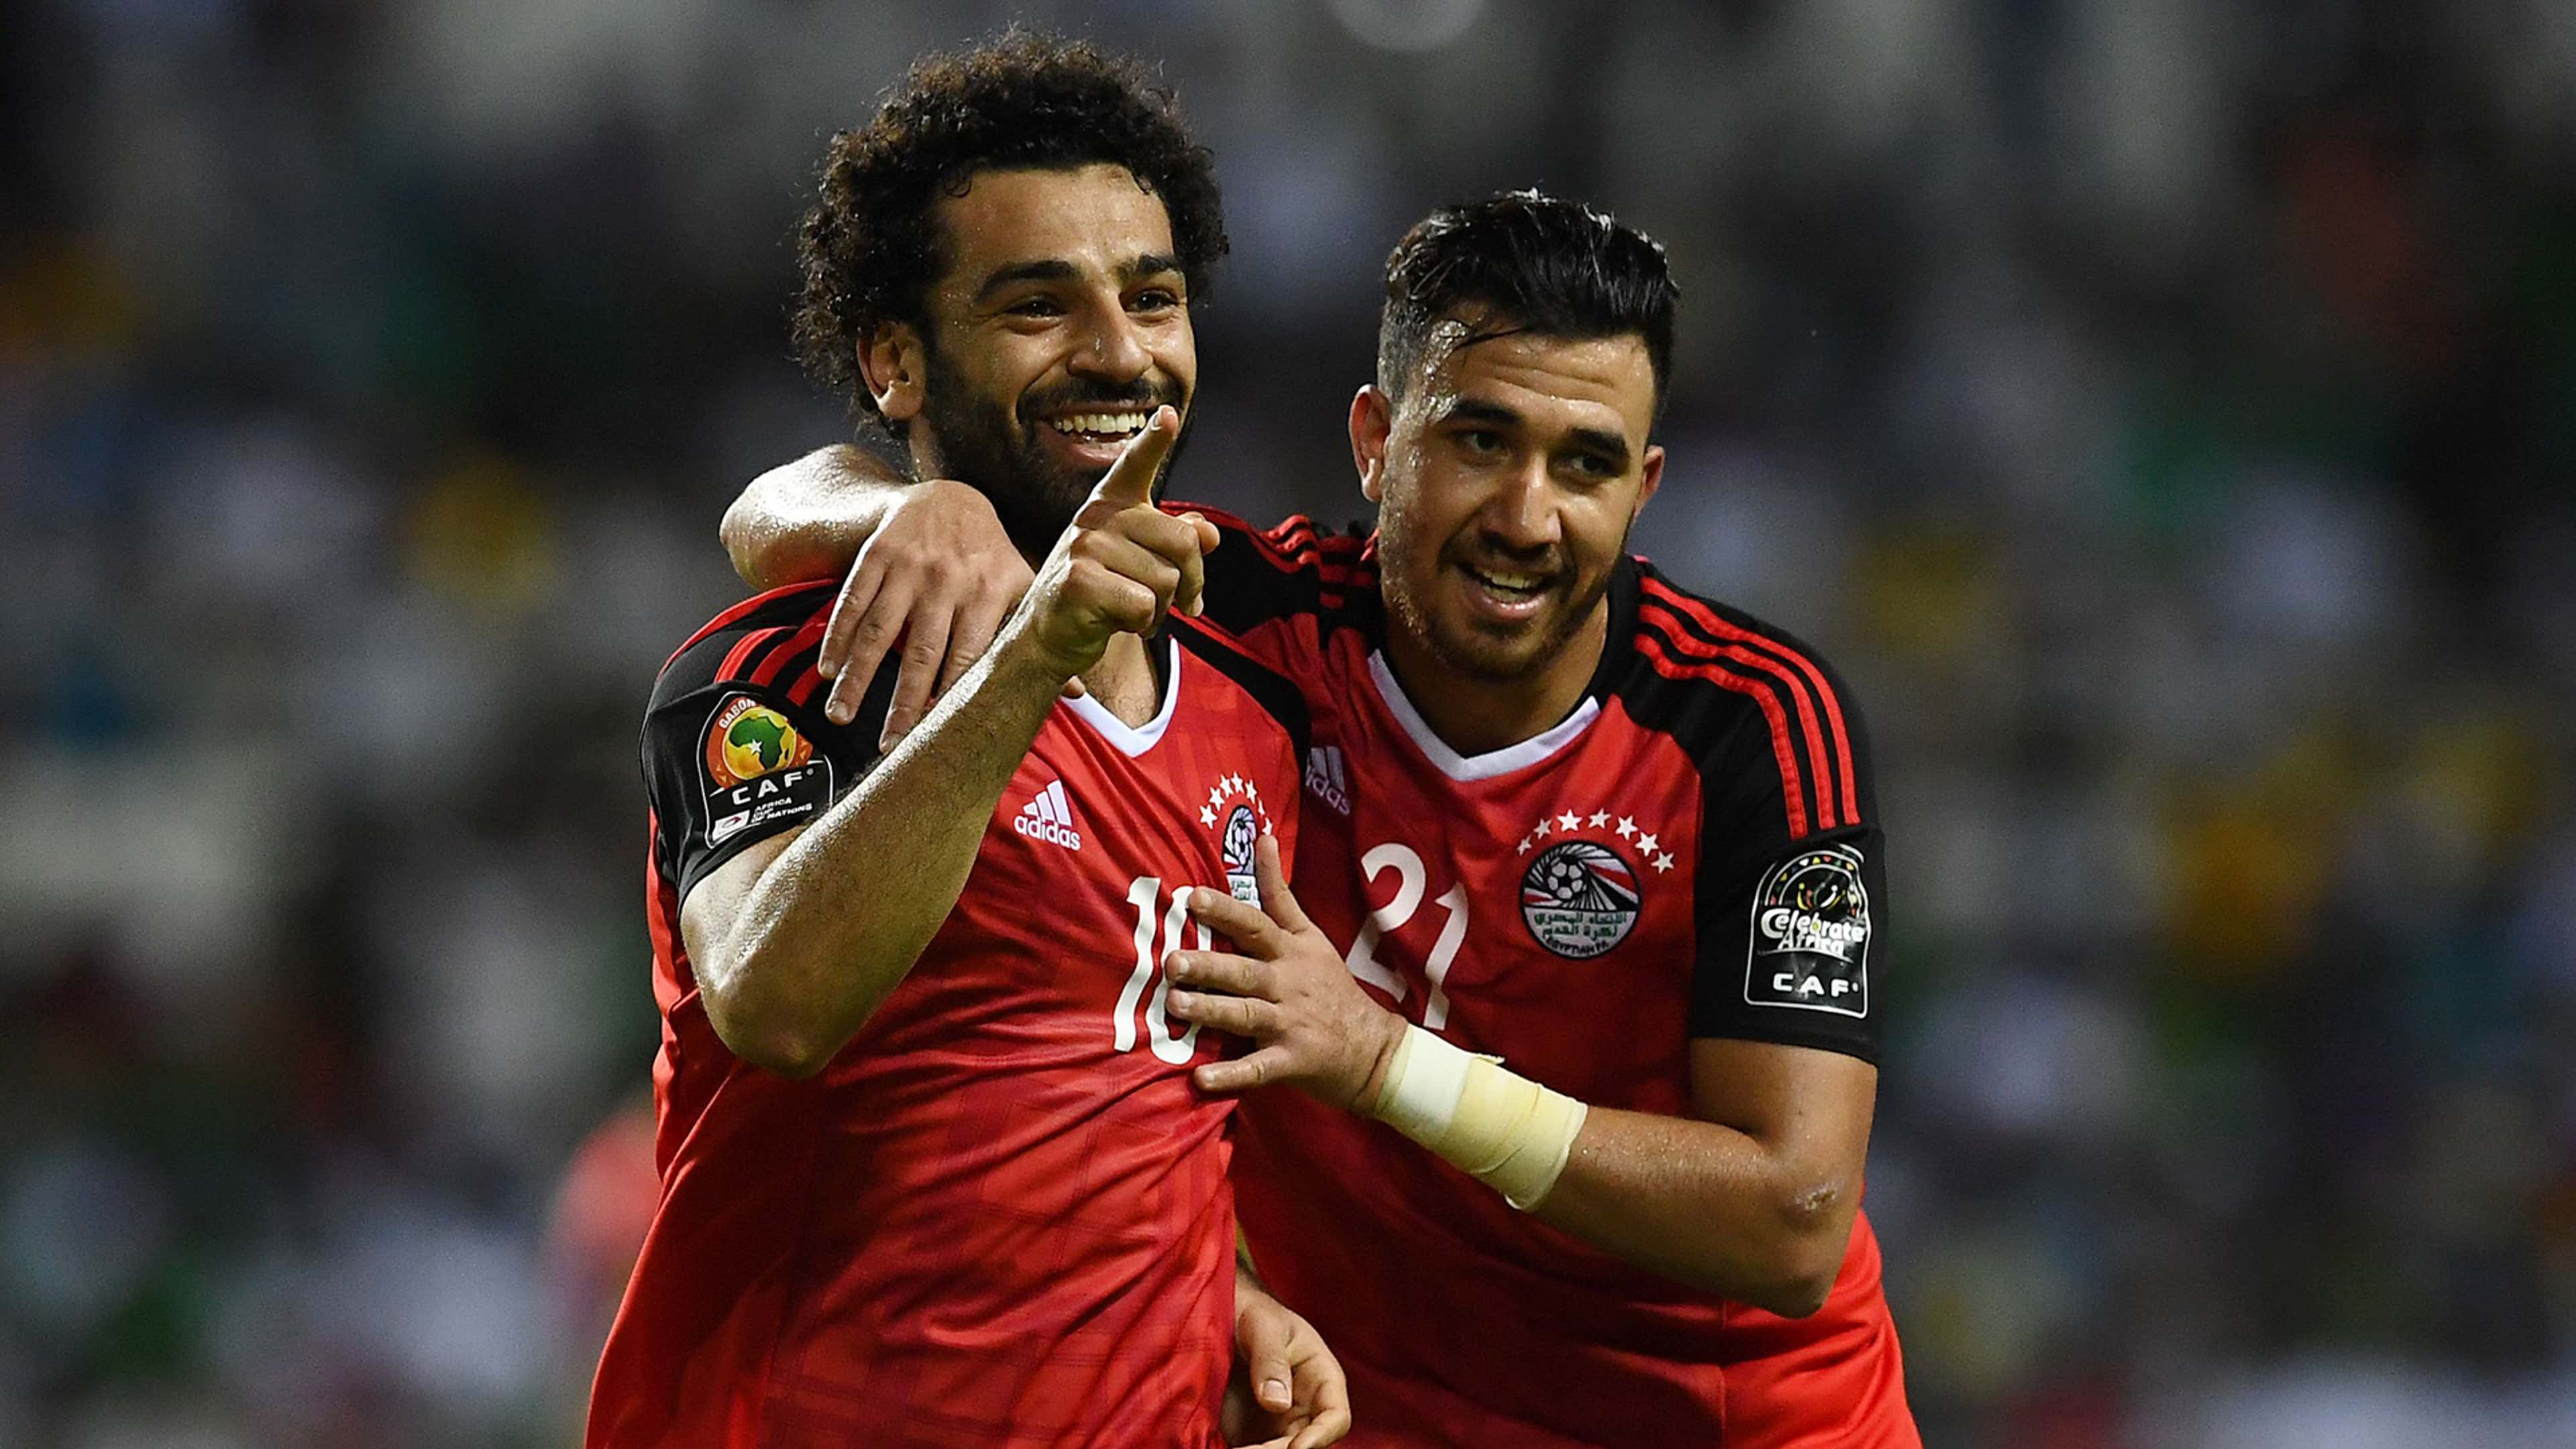 Mohamed Salah Egypt Africa Cup of Nations 2017